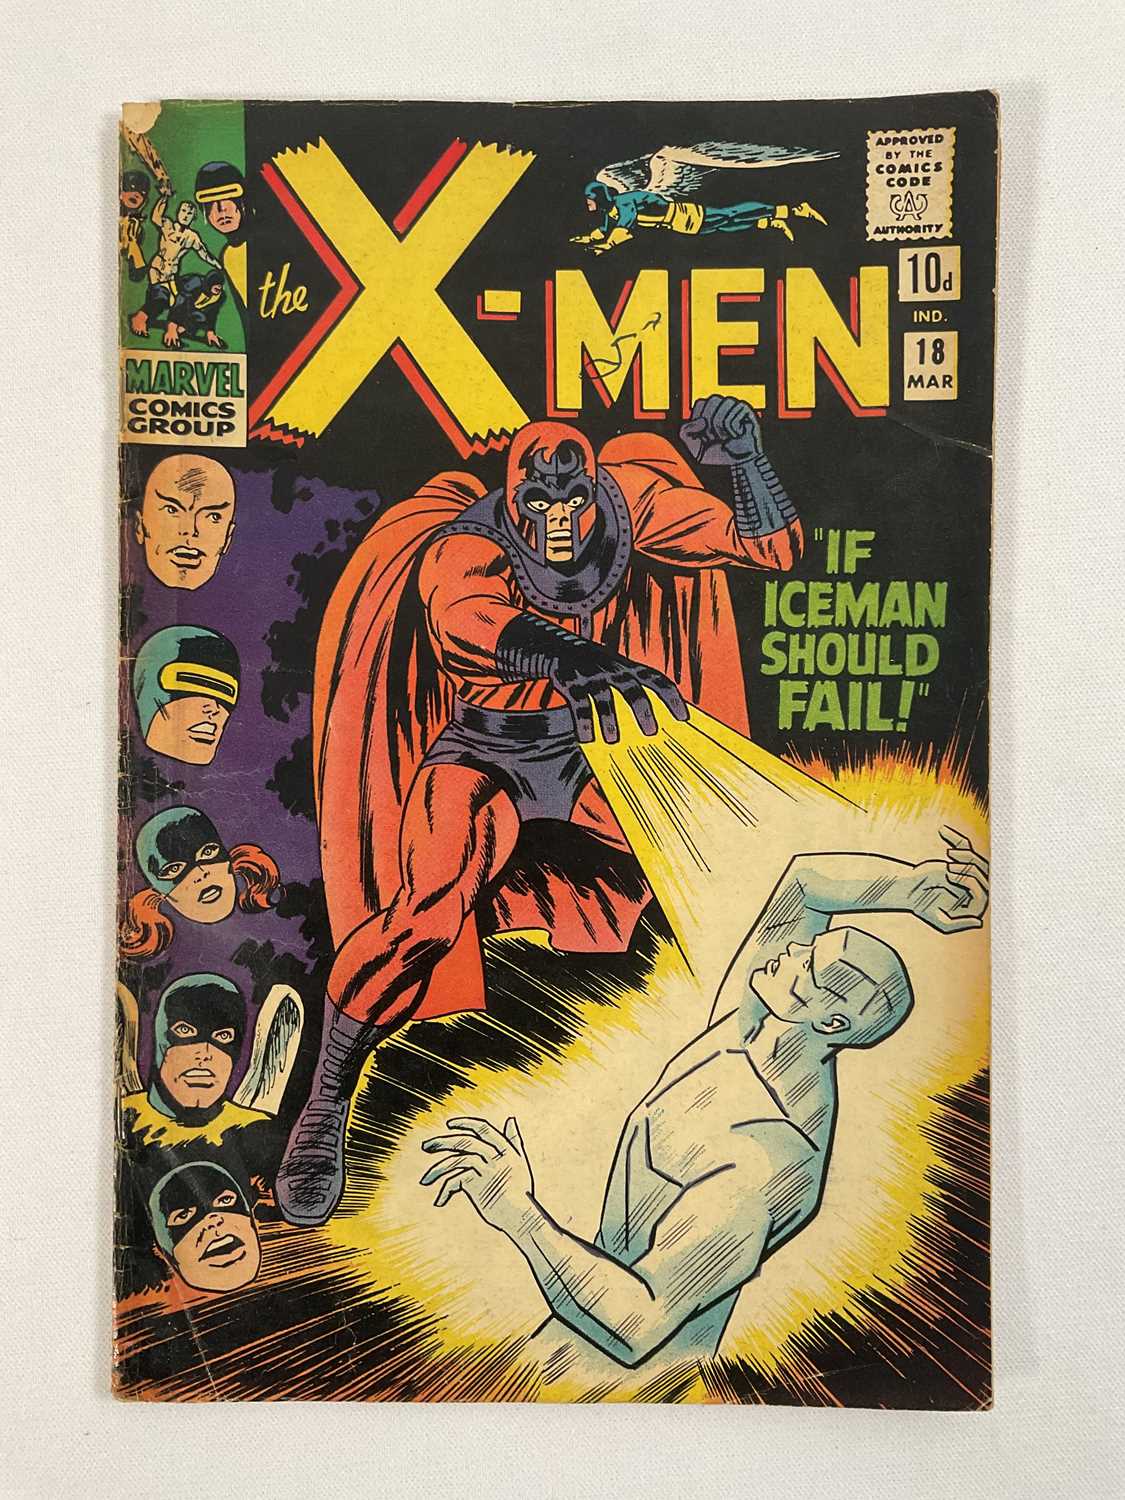 X-MEN #17, 18, 19, 20 (4 in Lot) - (1966 - MARVEL - UK Price Variant) - Includes the first - Image 2 of 6